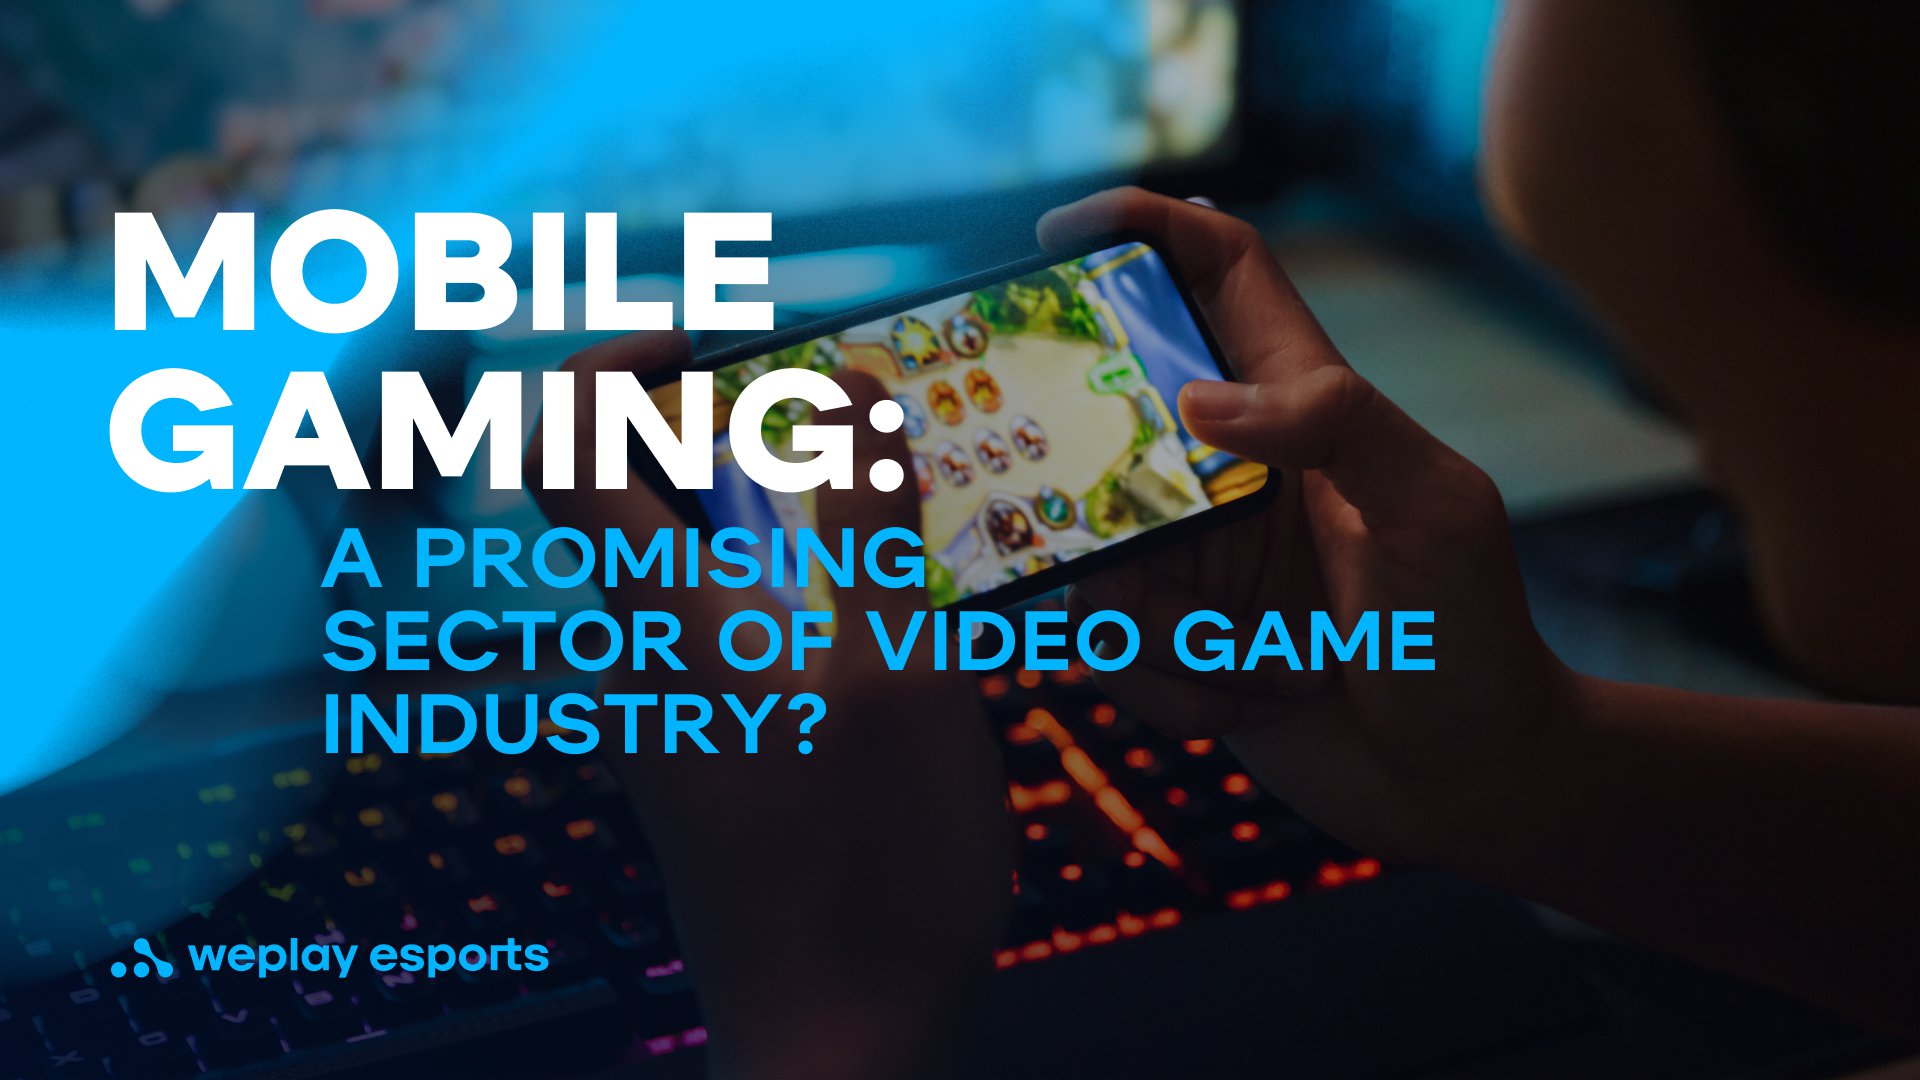 Mobile gaming: a promising sector of video game industry? Credit: WePlay Holding